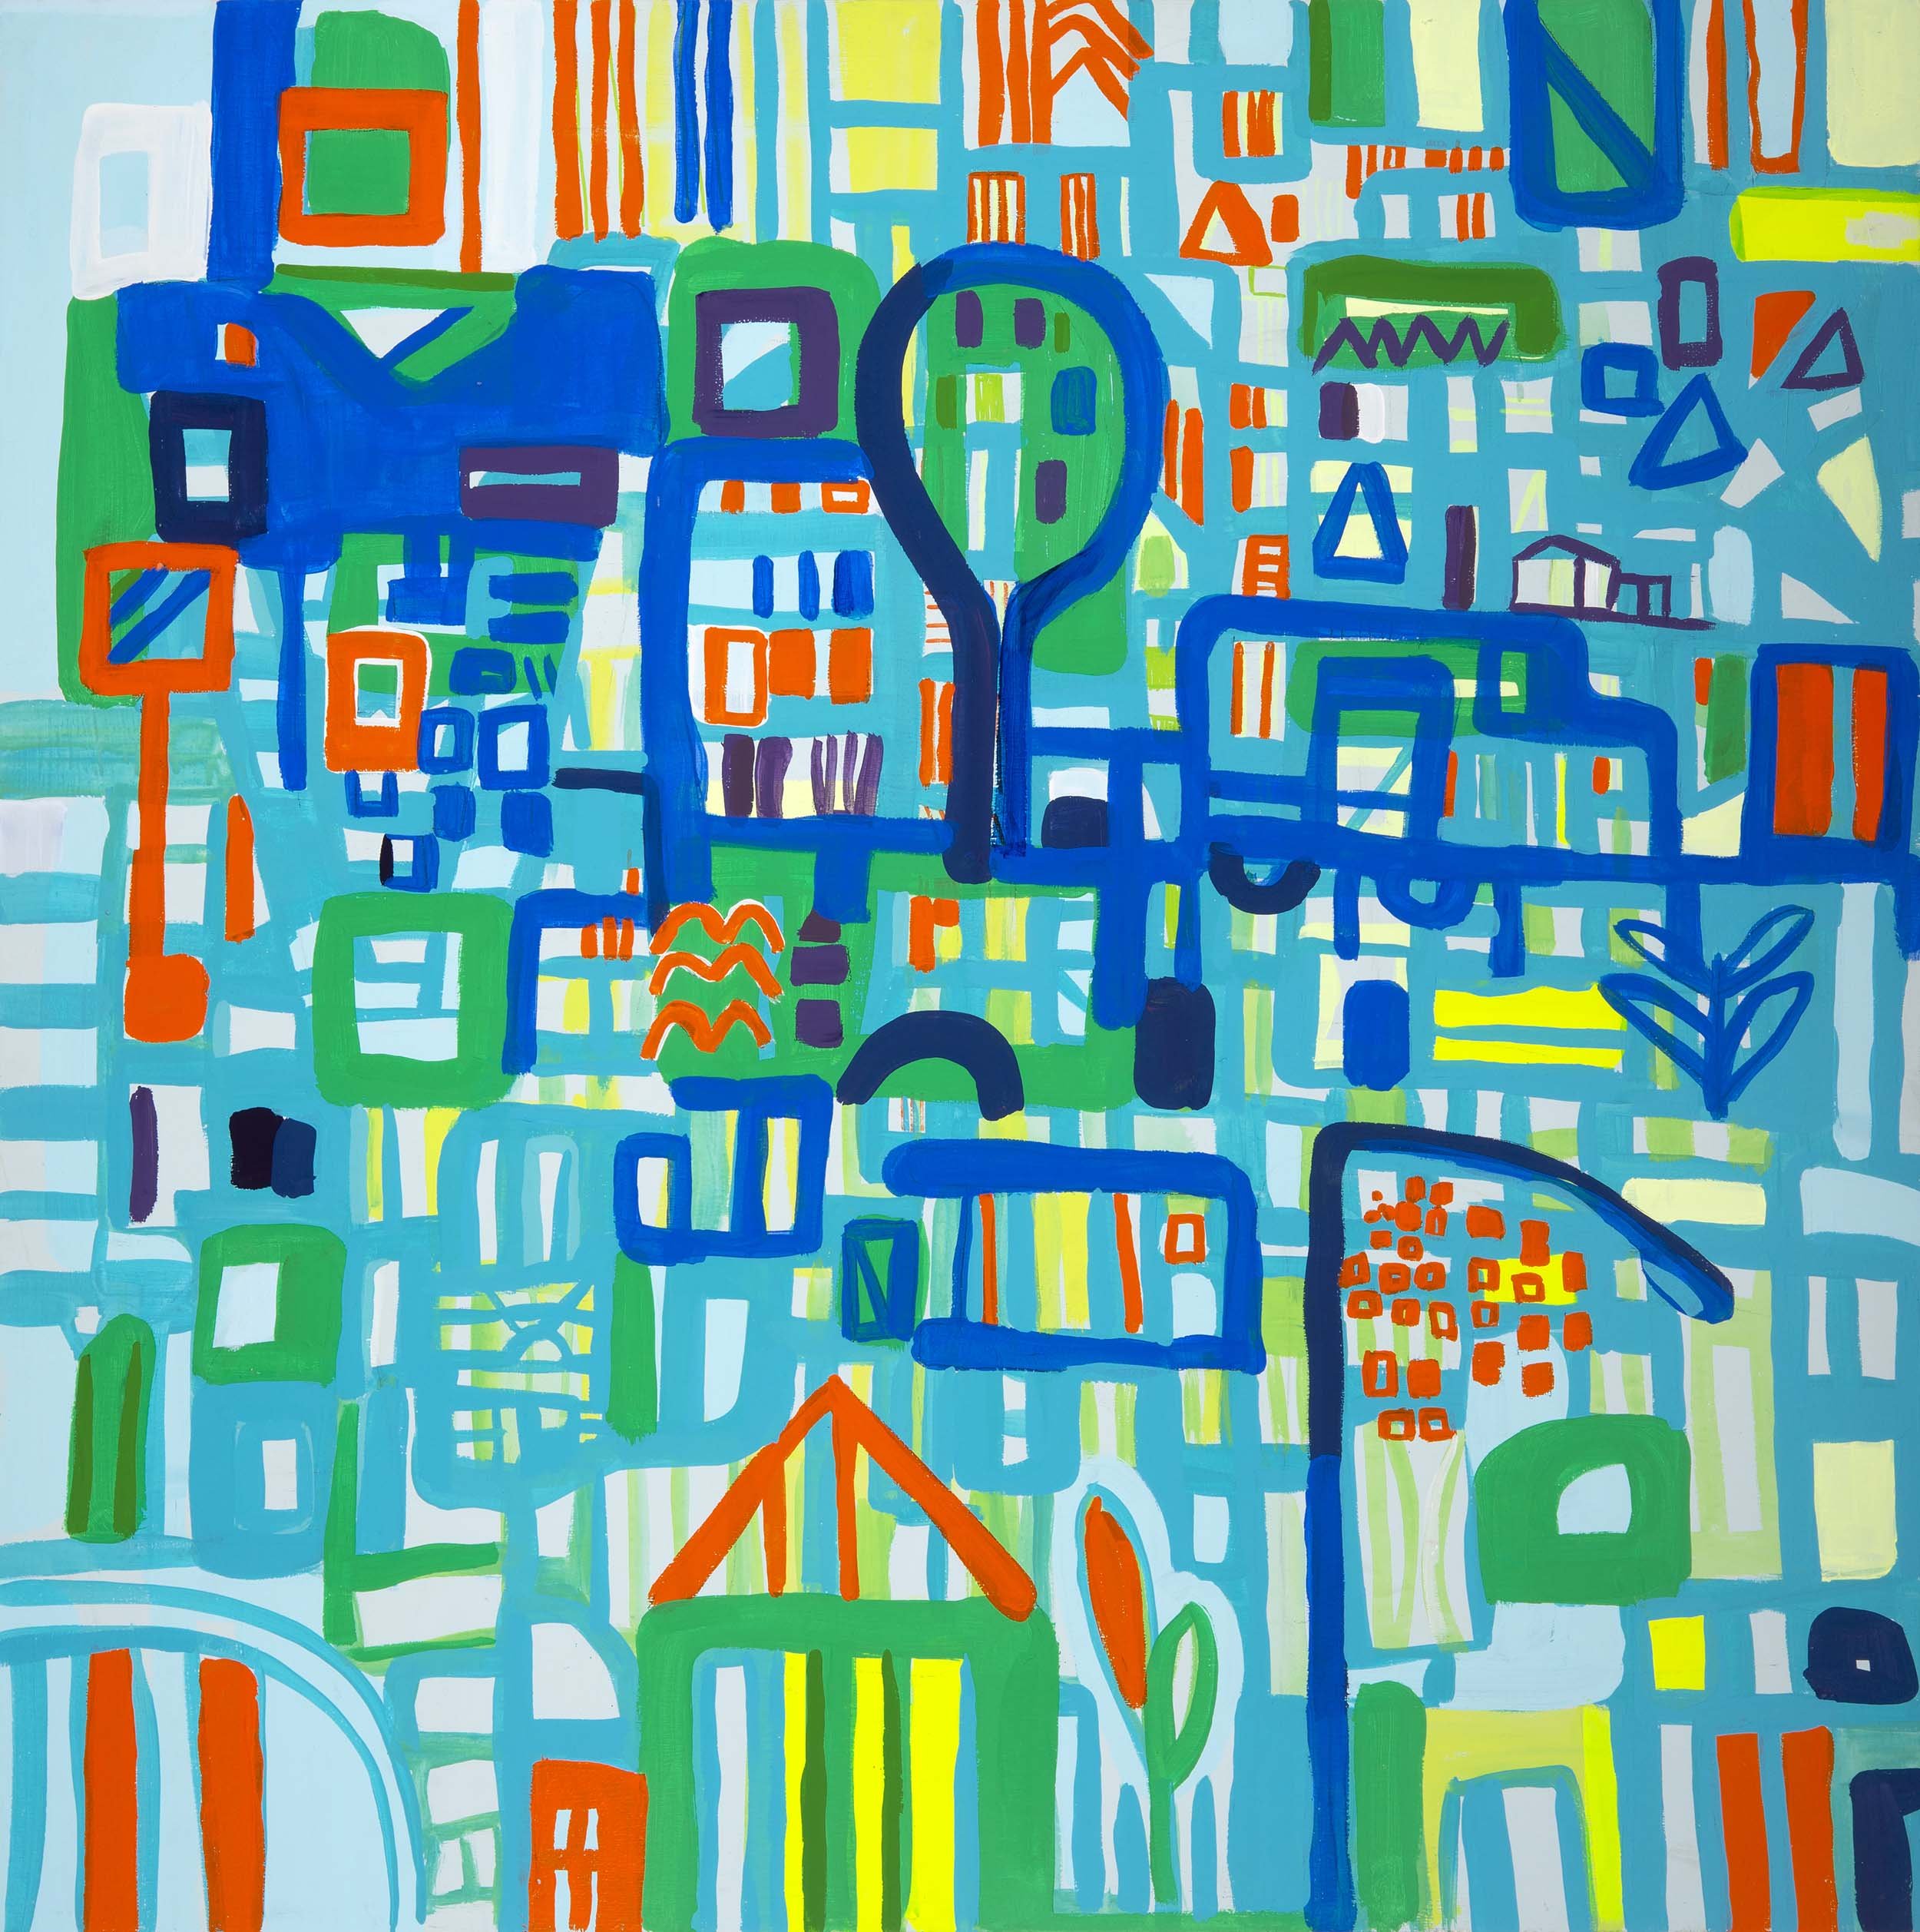  walk across town | acrylic on panel | 36" x 36" | 2022  Available by  request     